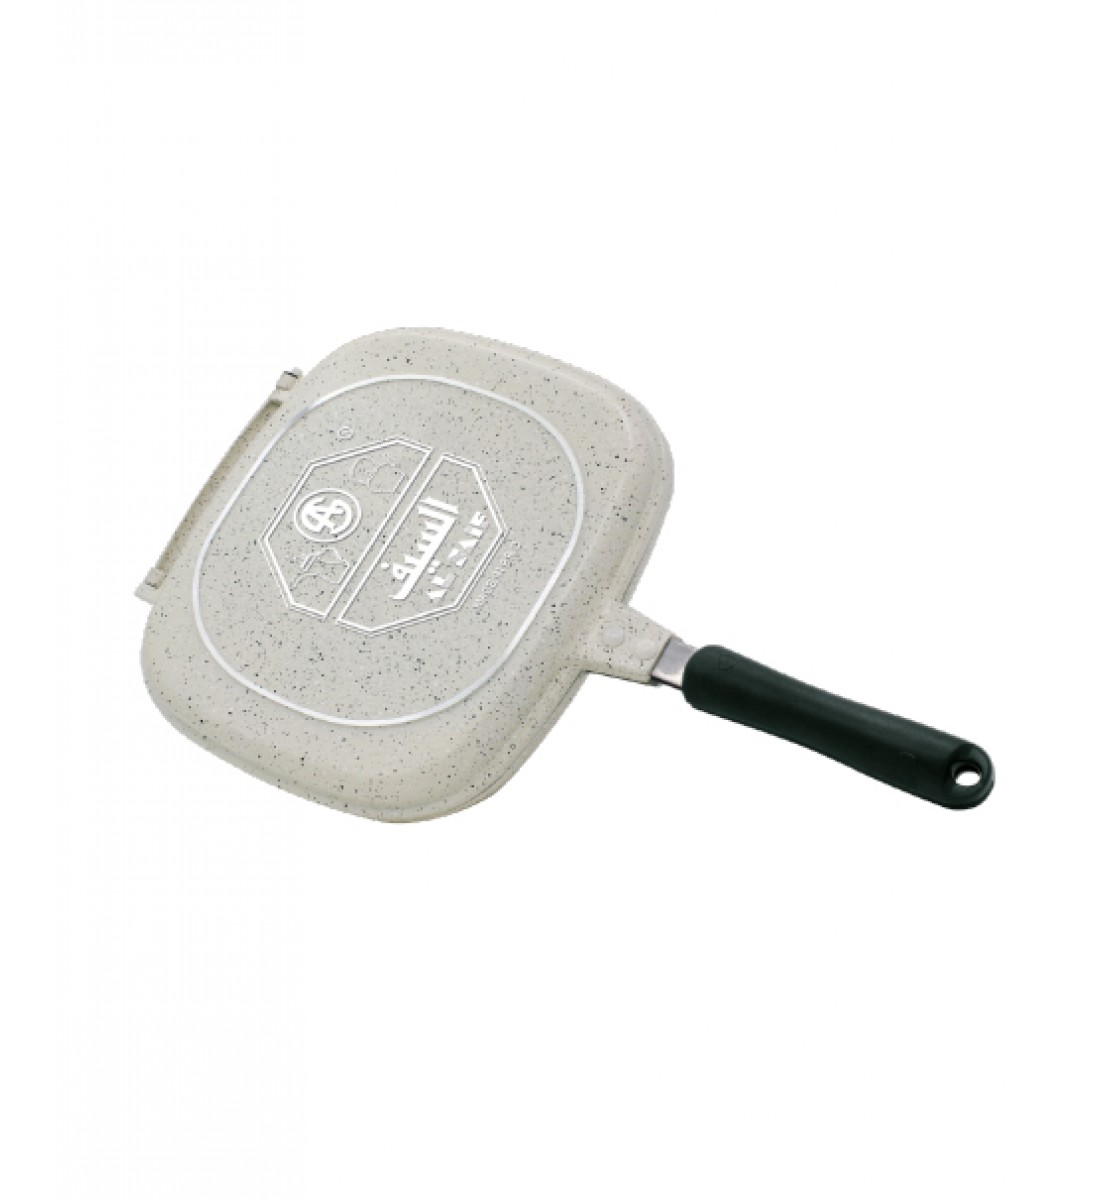 Neoflam double sided grill pan - 42 cm